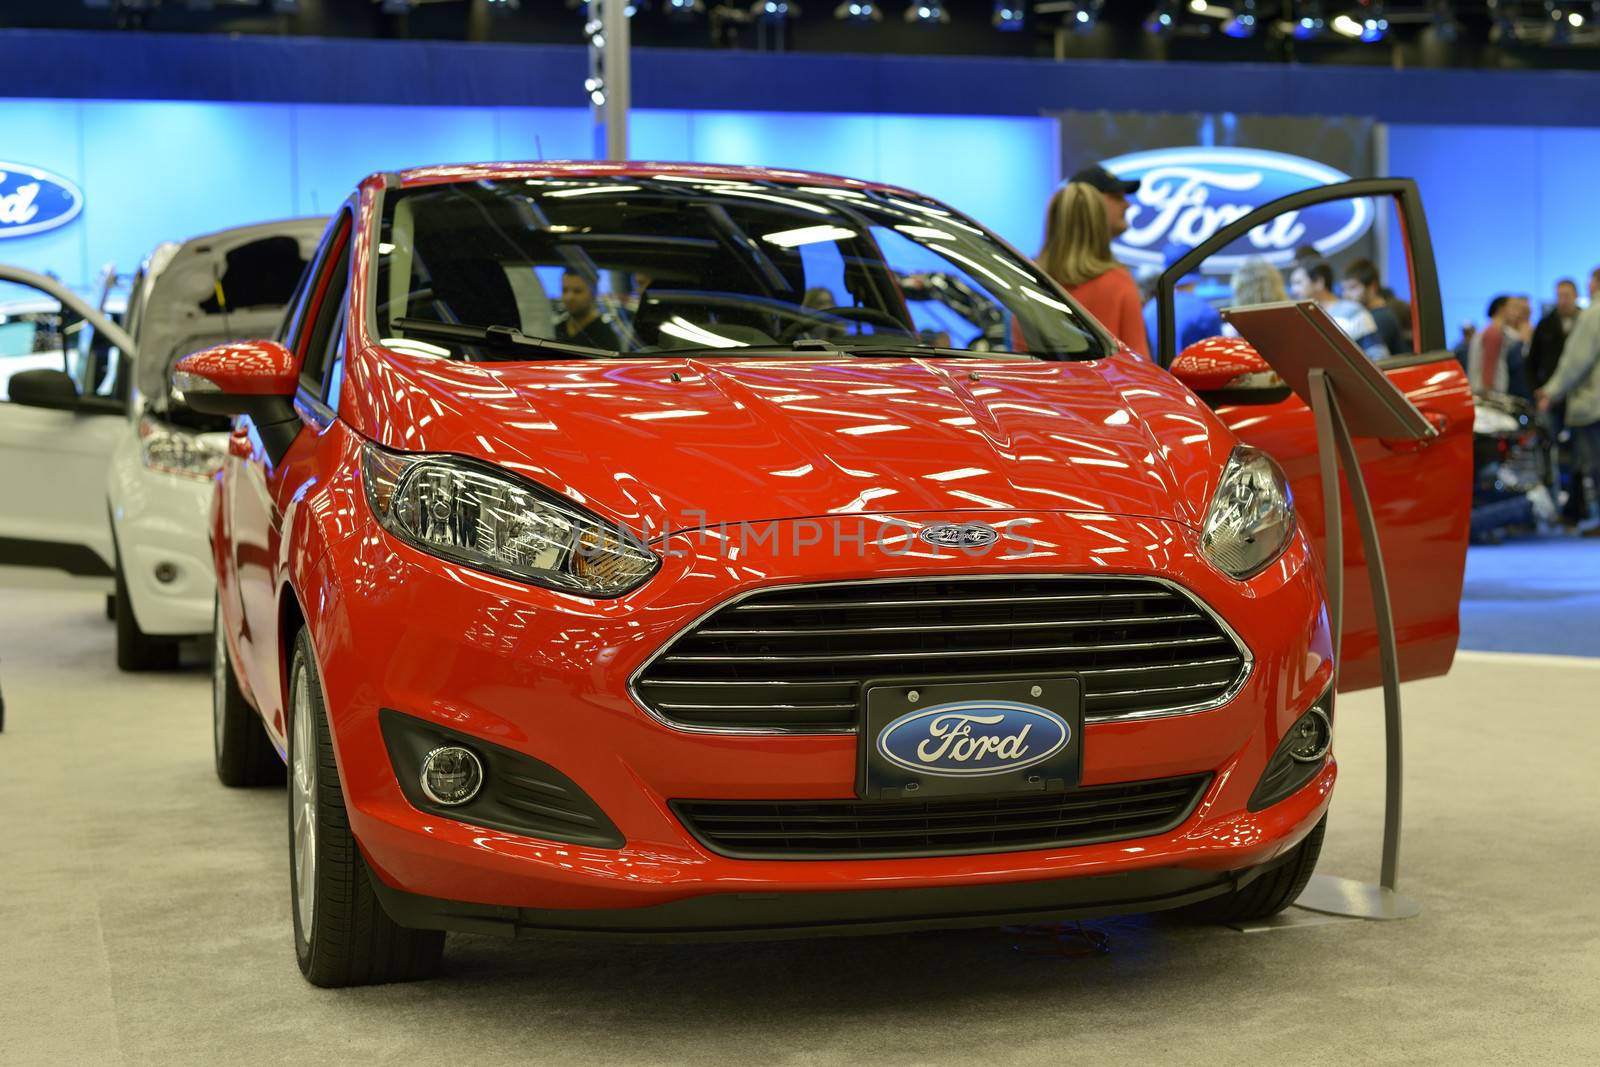 New Ford Fiesta shown at The Montreal International Auto Show  at the Palais des Congres de Montreal 46th Edition